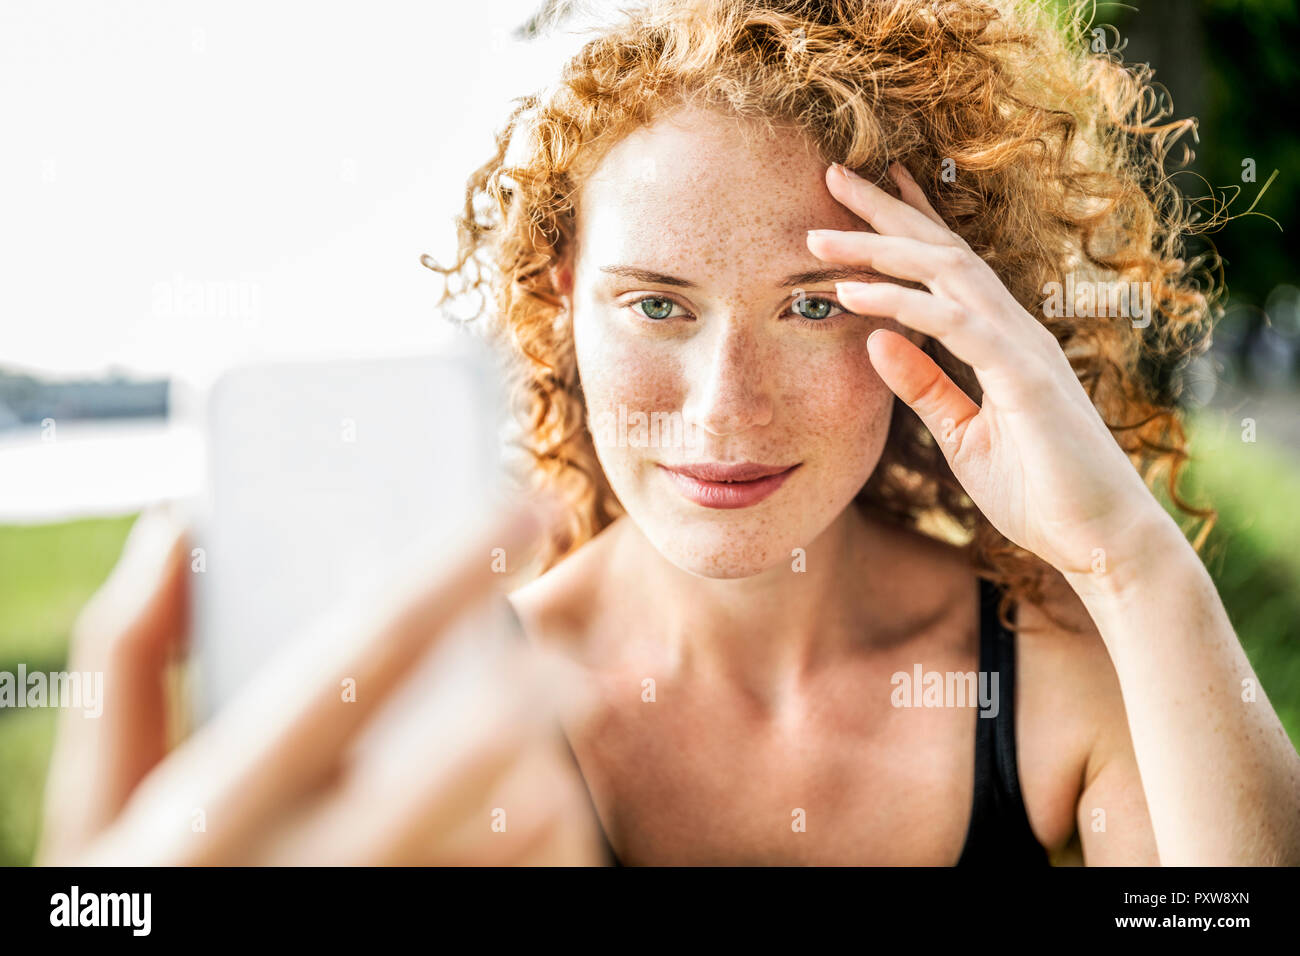 Portrait of freckled young woman taking selfie with cell phone Stock Photo